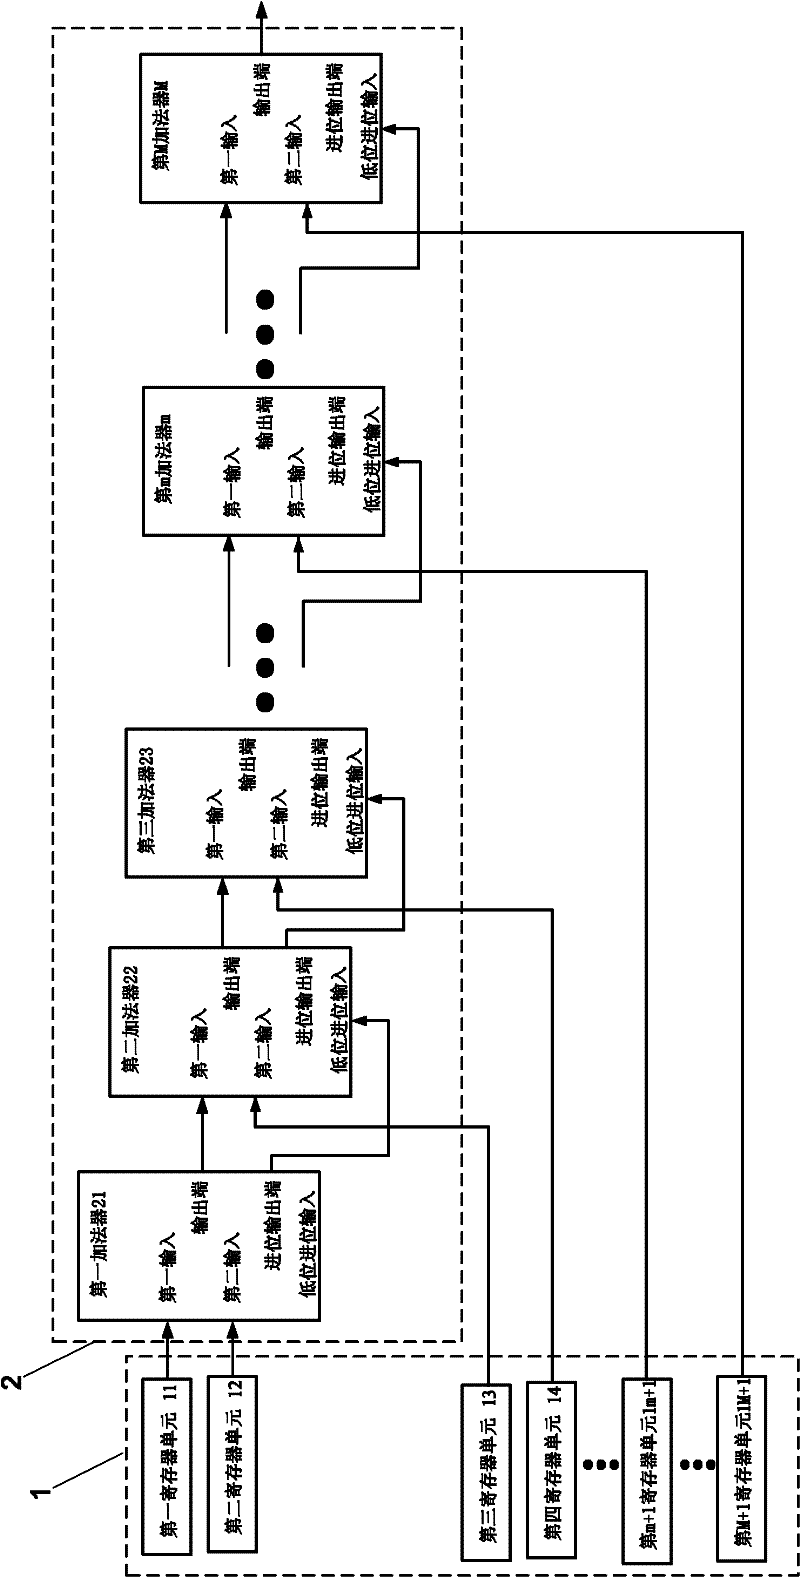 Pulsar signal detector based on single event effect